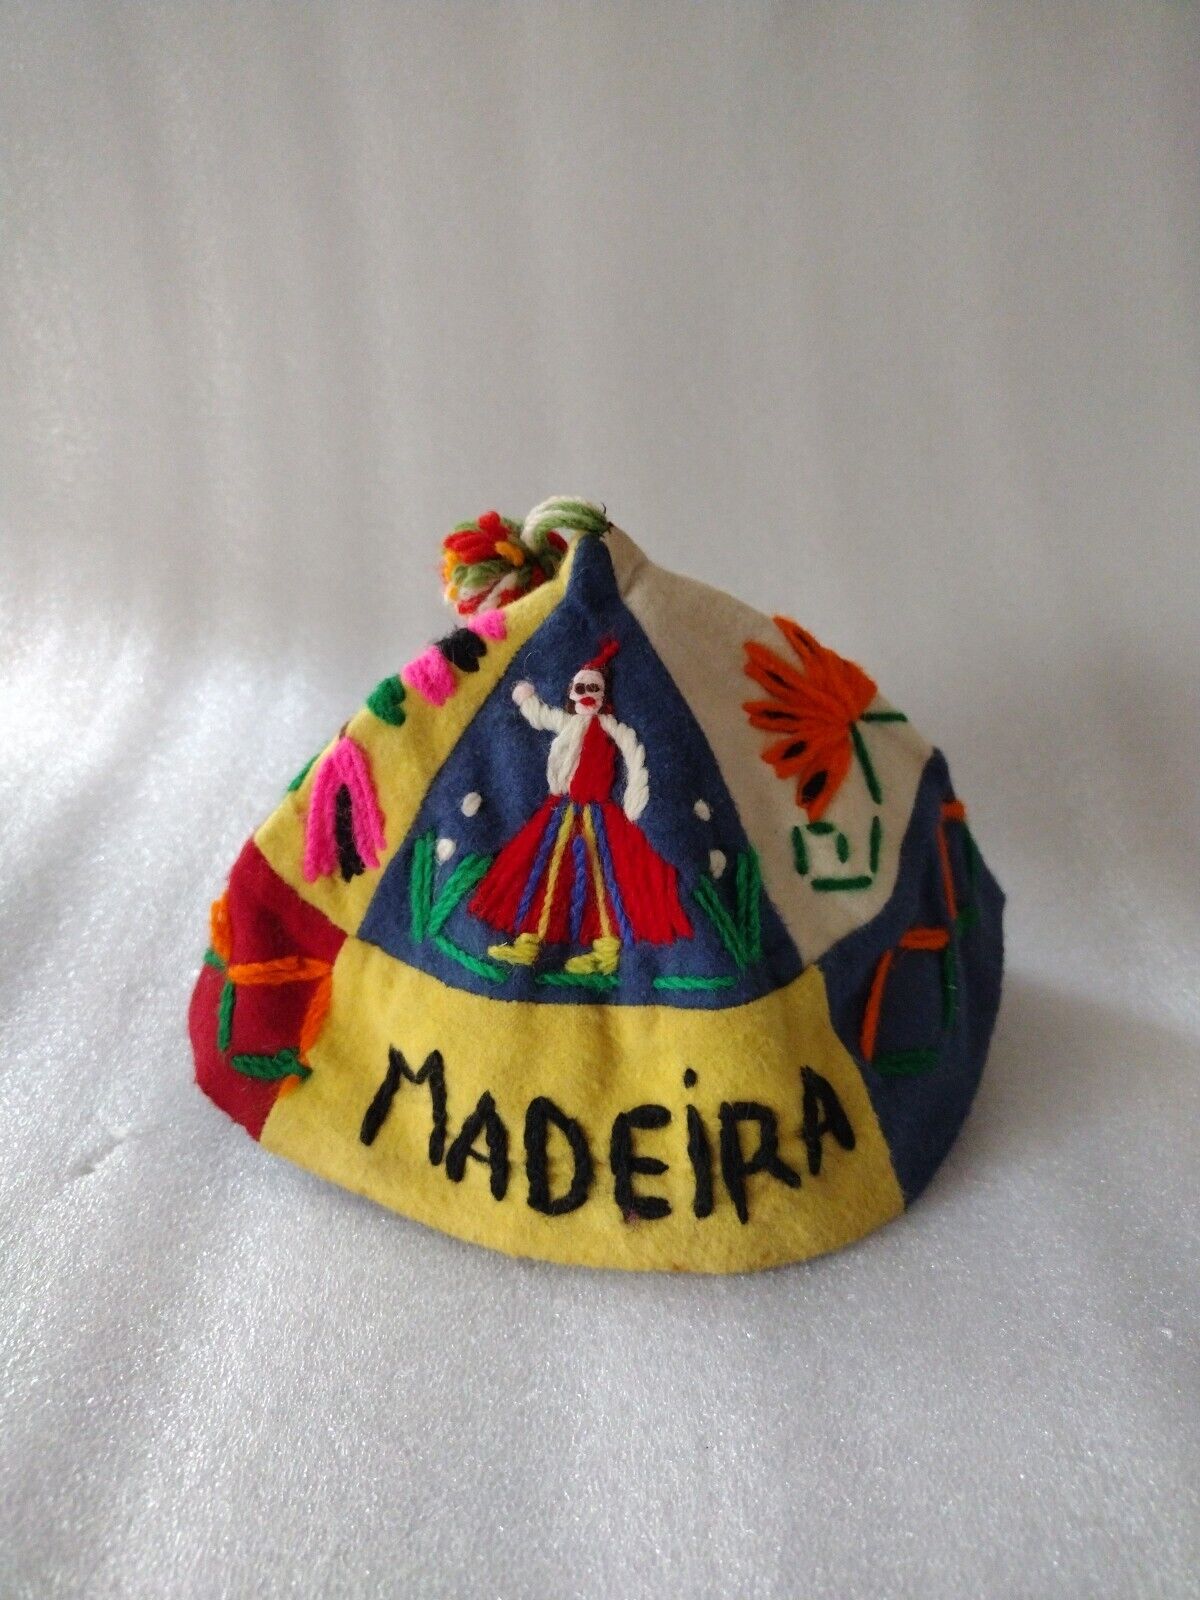 Vintage Ethnic Madeira Hand Sewn Embroidered Cap Hat Souvenir Gift Unique 